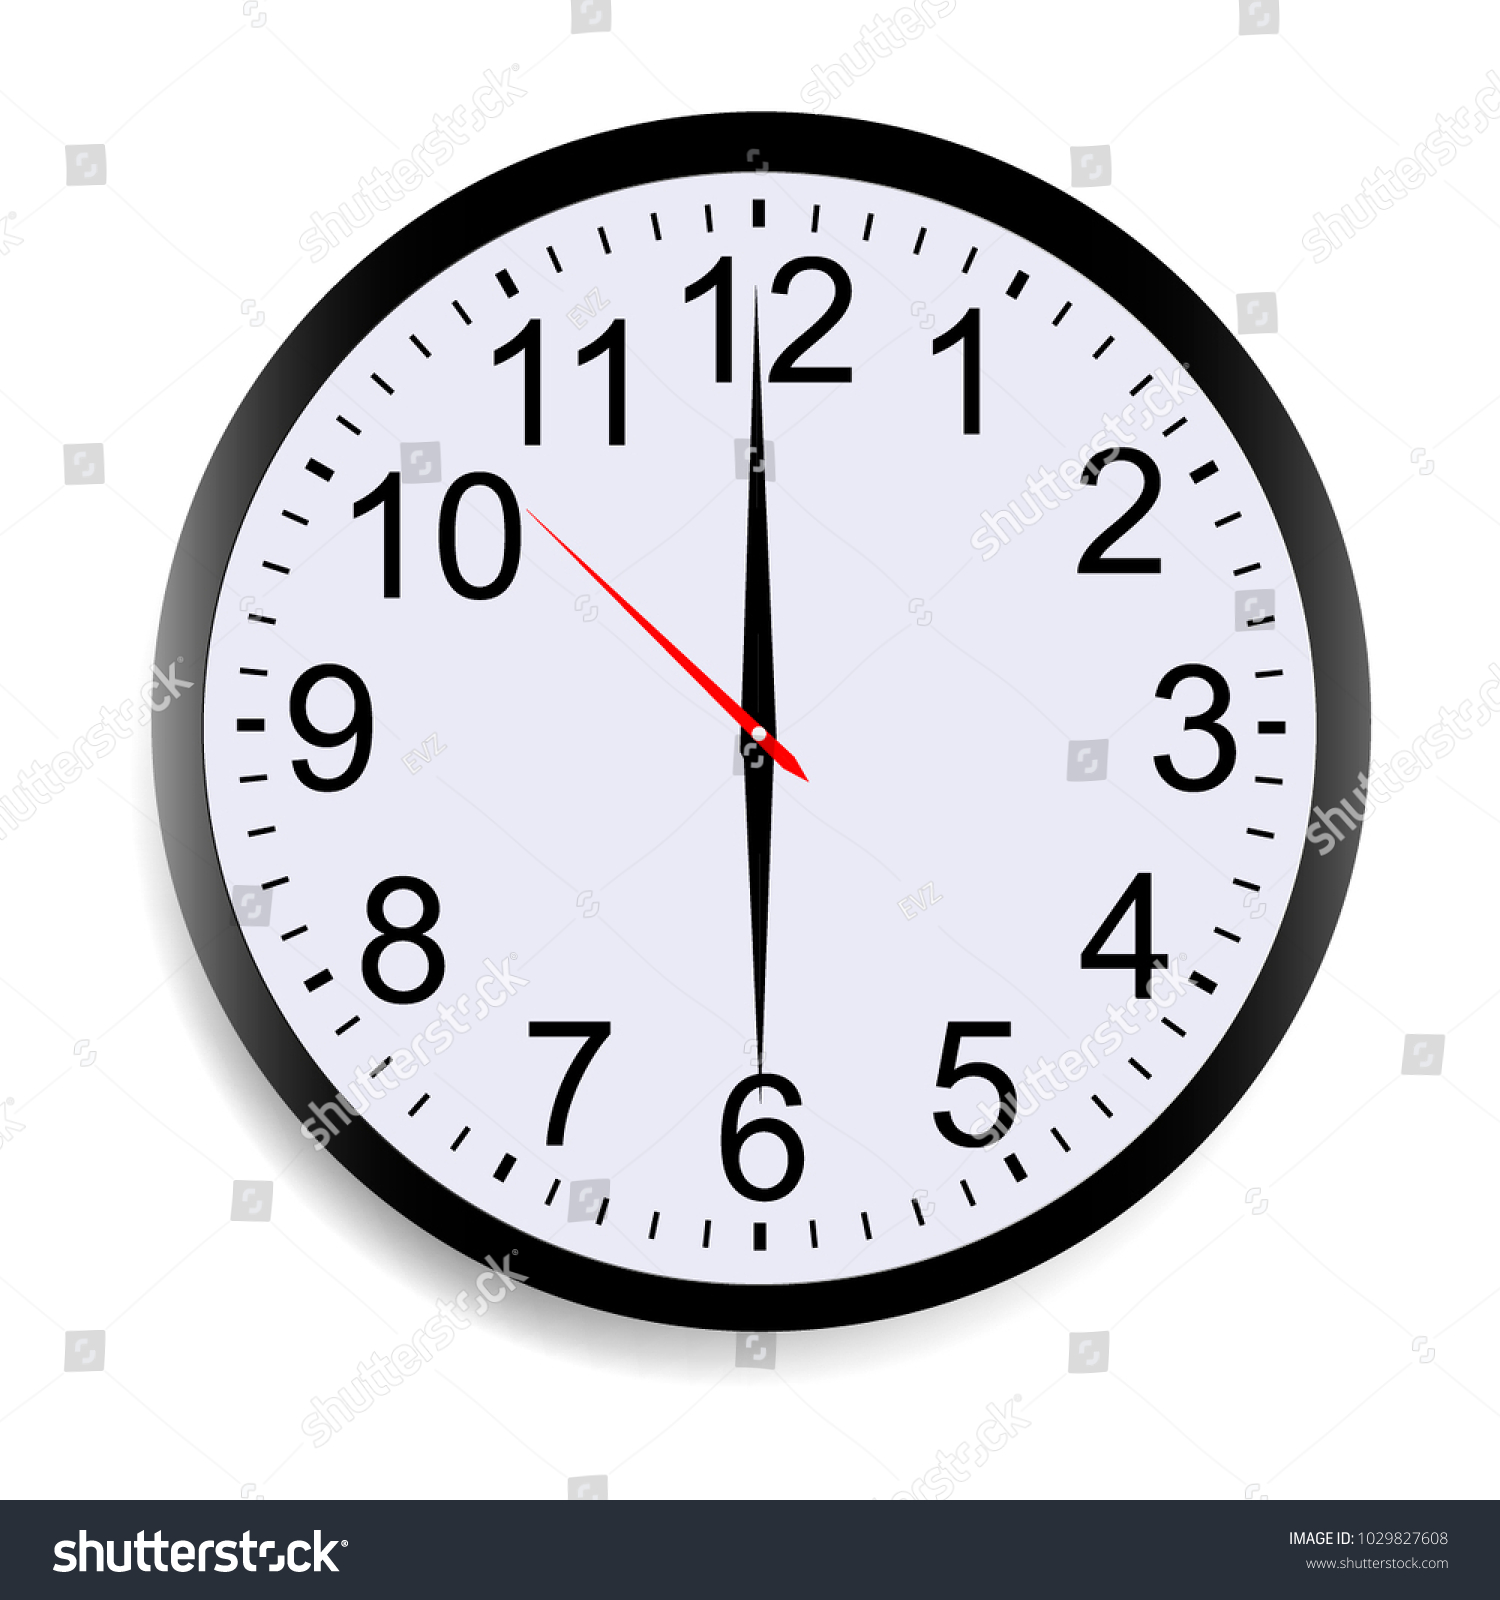 Stock Vector Round Clock Face Showing Six O Clock Isolated On White Background Vector Illustration 1029827608 